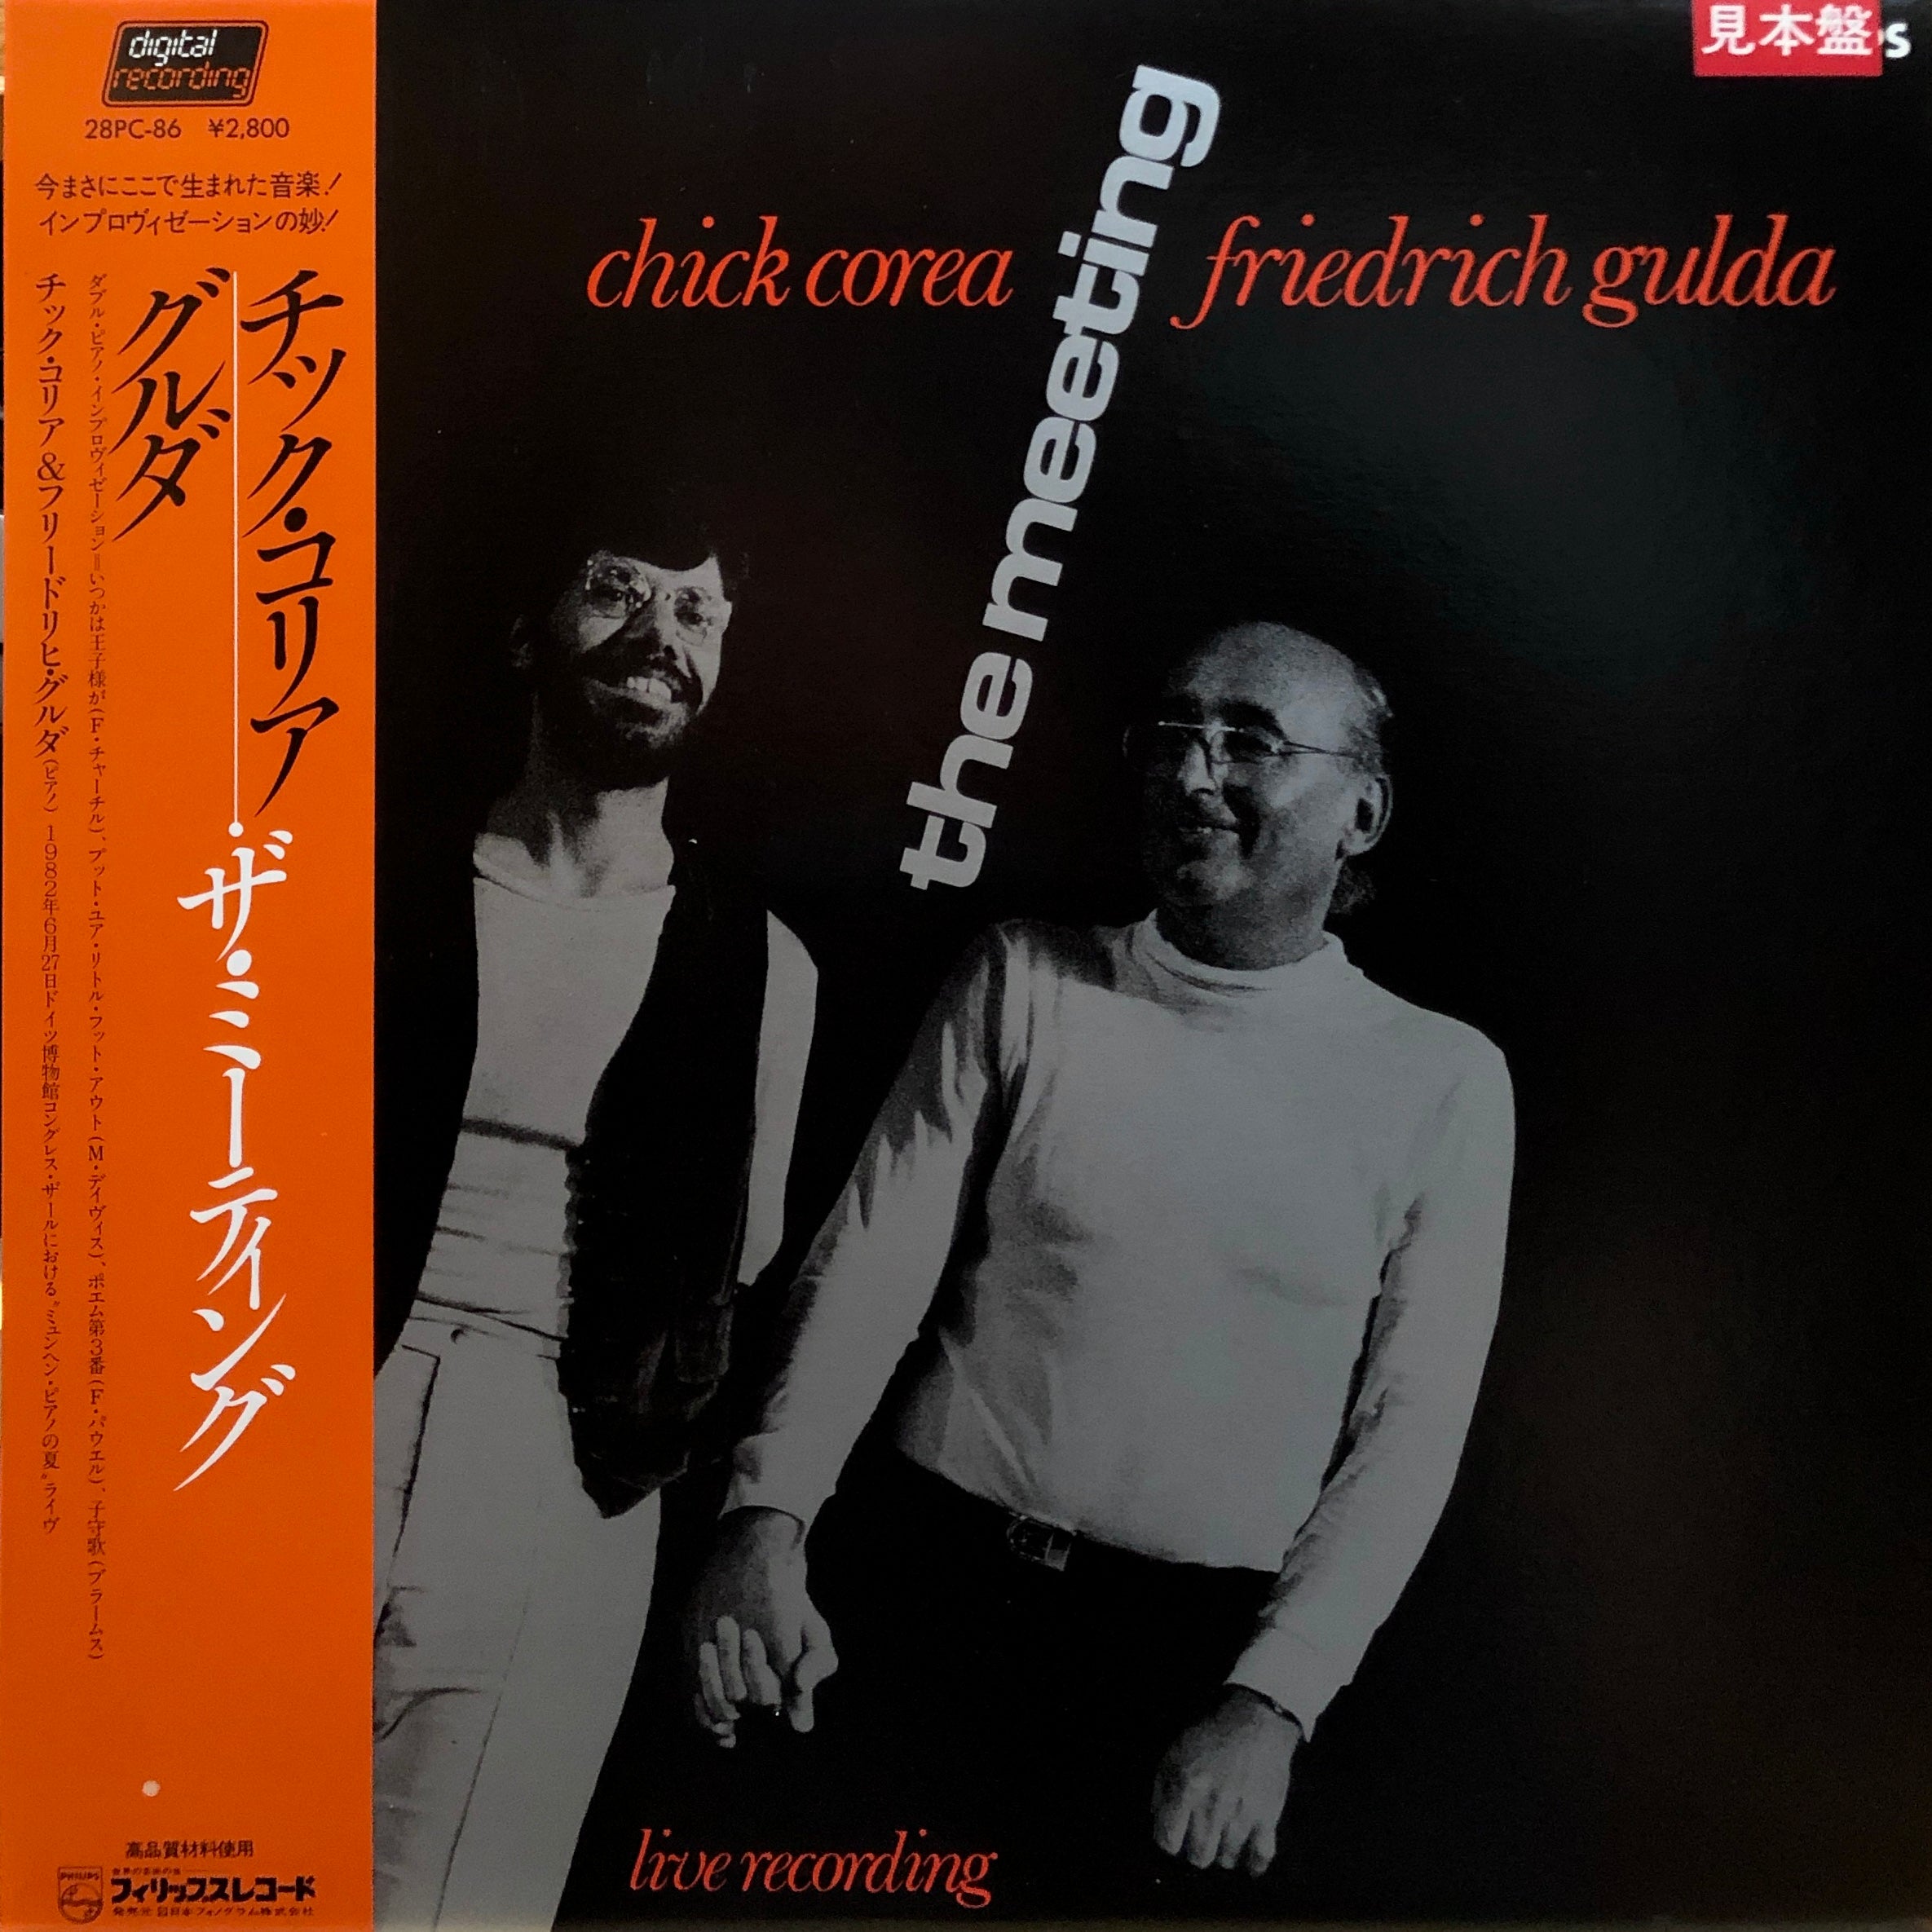 Chick Corea, Friedrich Gulda “The Meeting” – PHYSICAL STORE